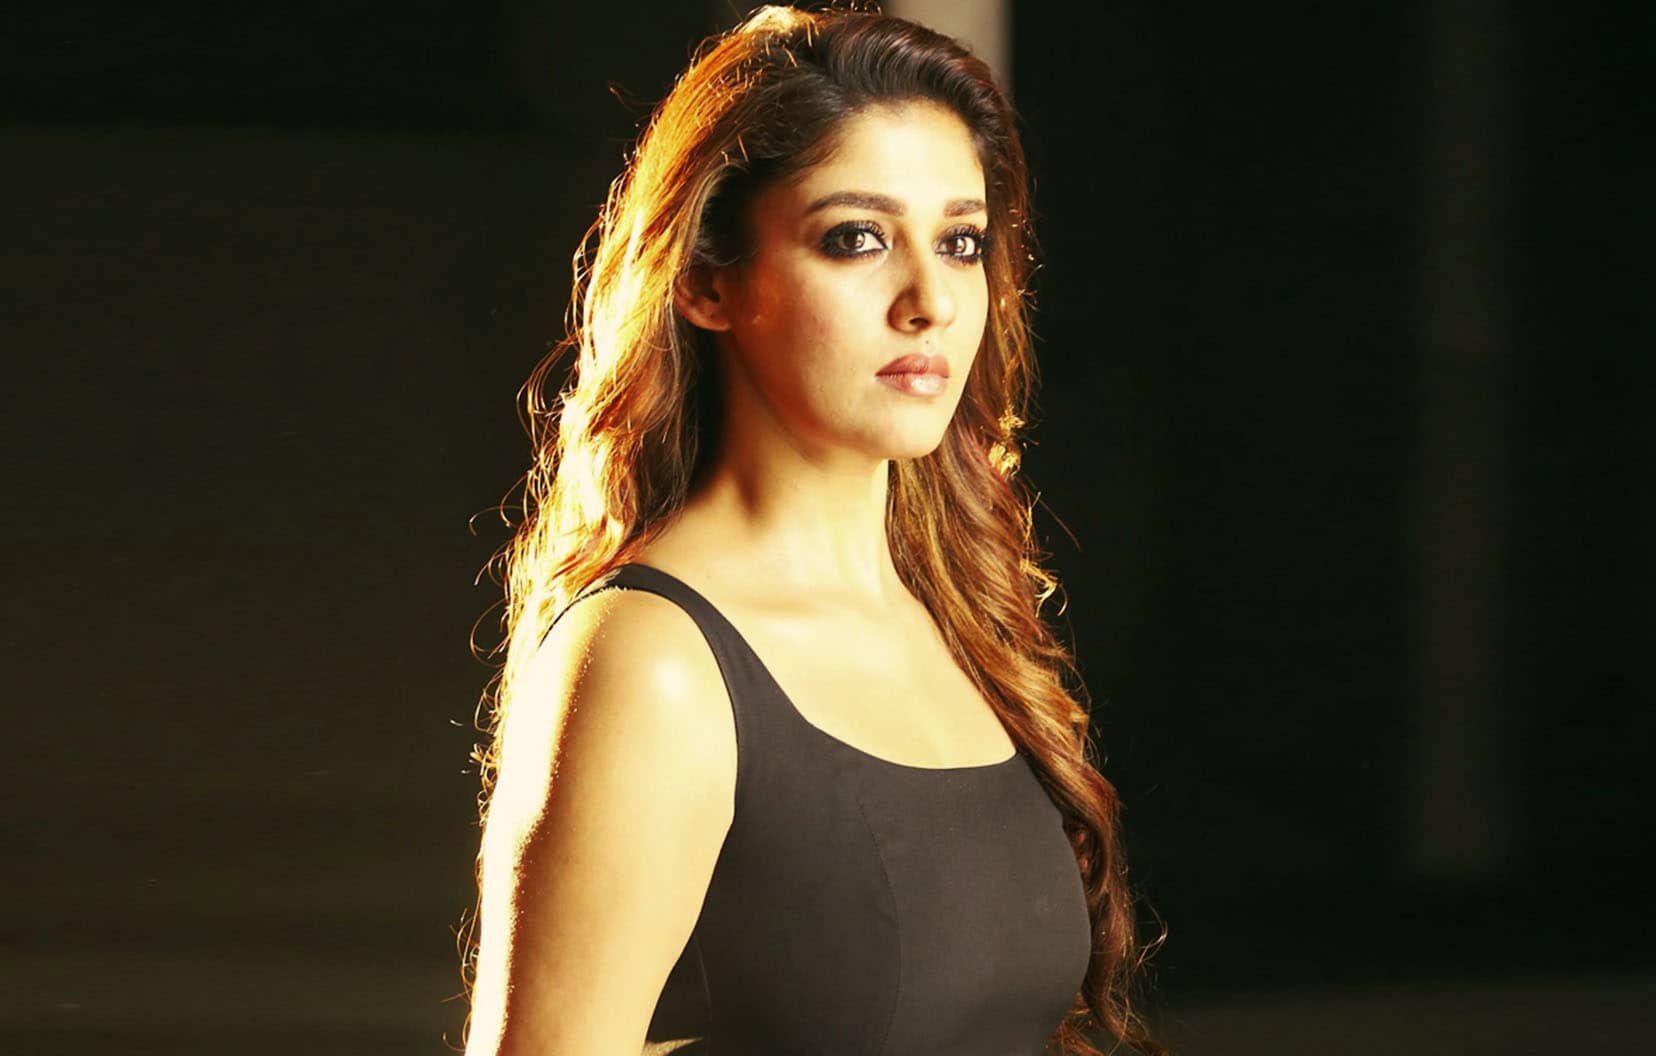 One of the fierce role with enchanting looks of #nayanthara of the movie # irumugan . Had been longing to recreate this look for so long… | Instagram